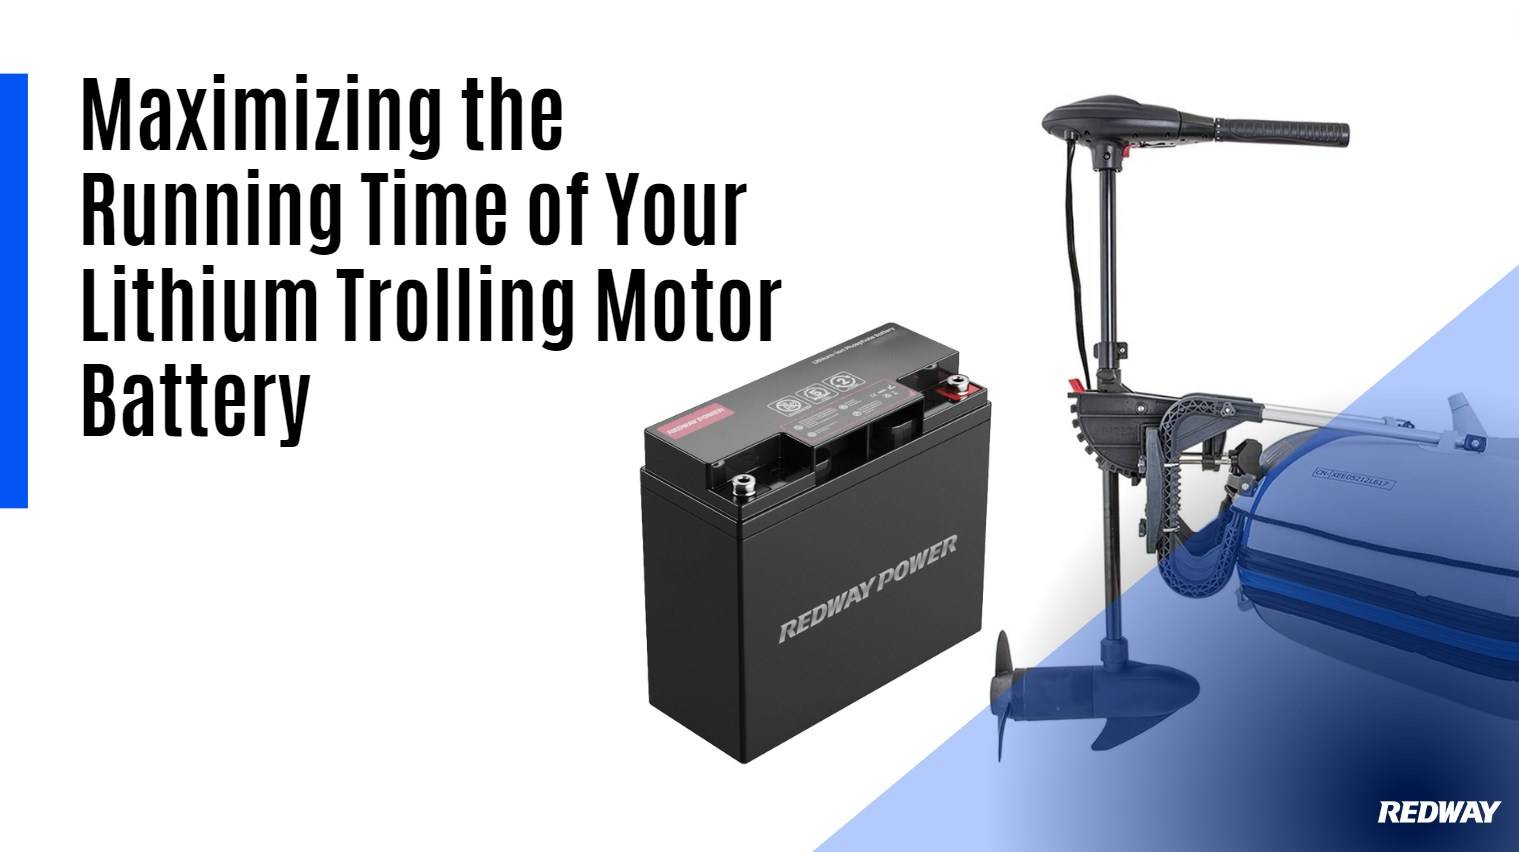 Maximizing the Running Time of Your Lithium Trolling Motor Battery. 12v 20ah lfp battery